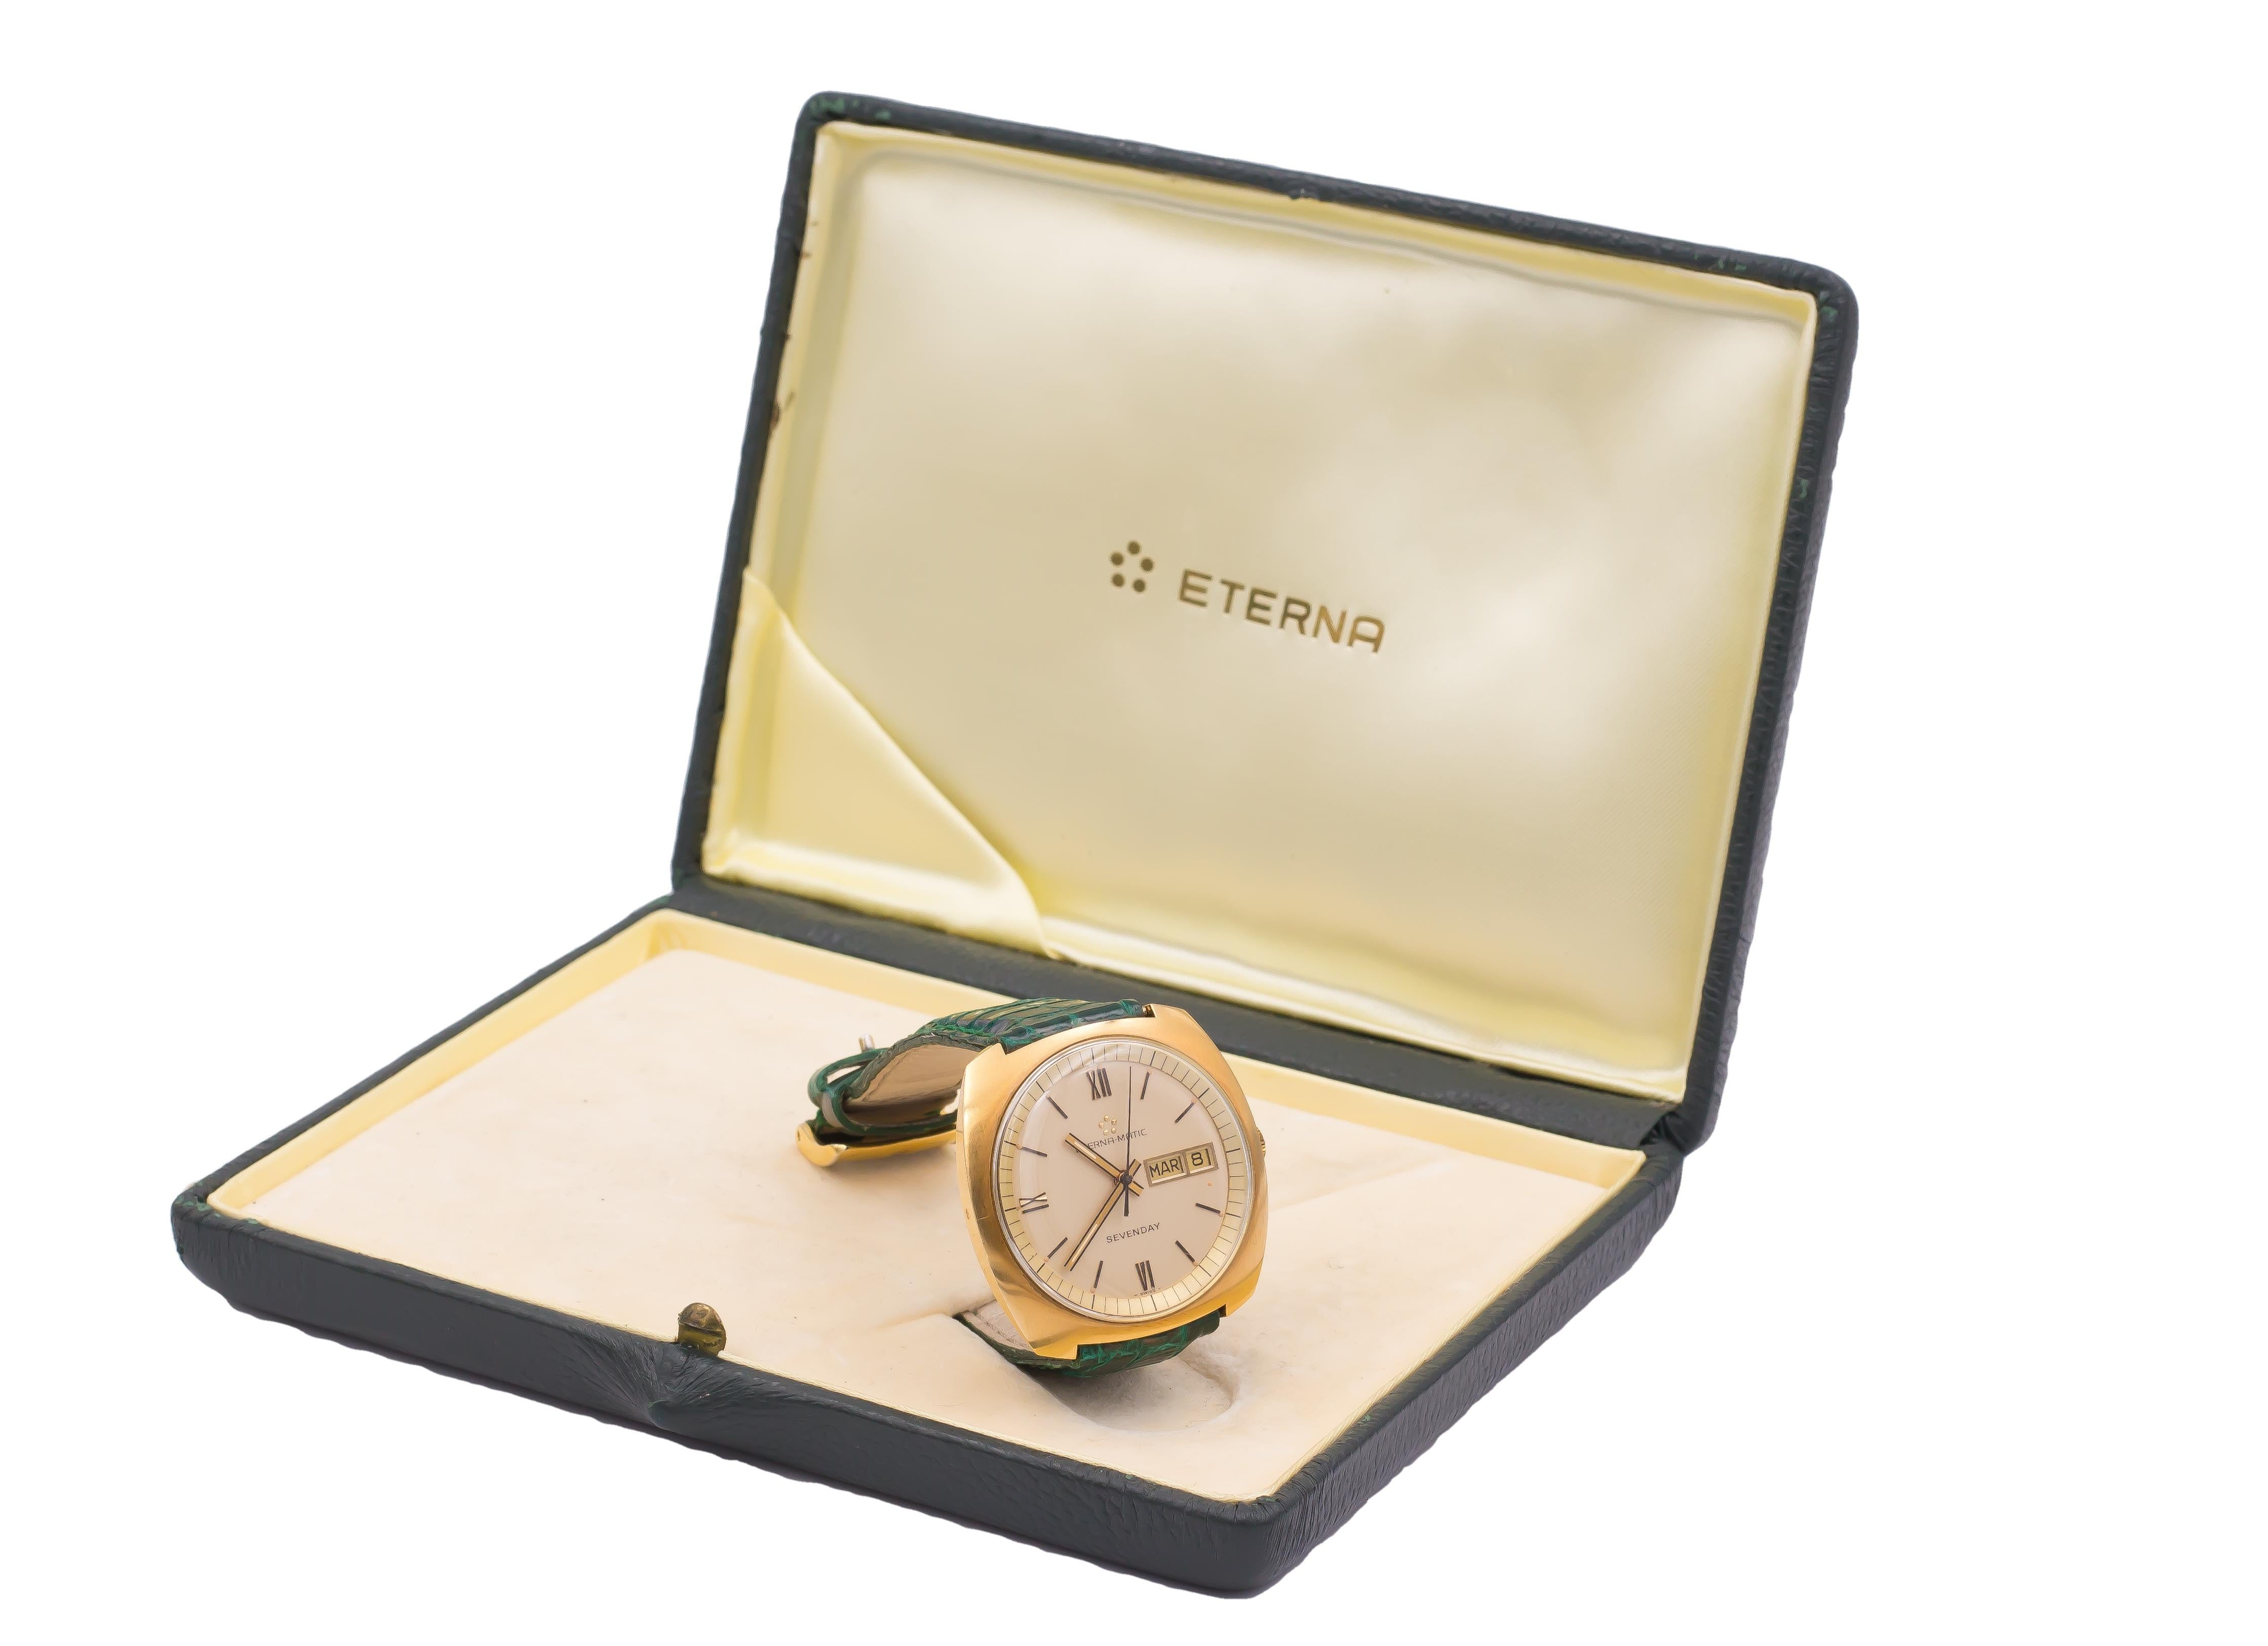 A vintage 18K gold Eterna Matic Sevenday automatic wrist watch, dating from the 1970s.
It has its original box.  

BRAND
Eterna Matic (product line: Sevenday)

MATERIALS
18K gold

MEASUREMENTS
36 x 37 mm 